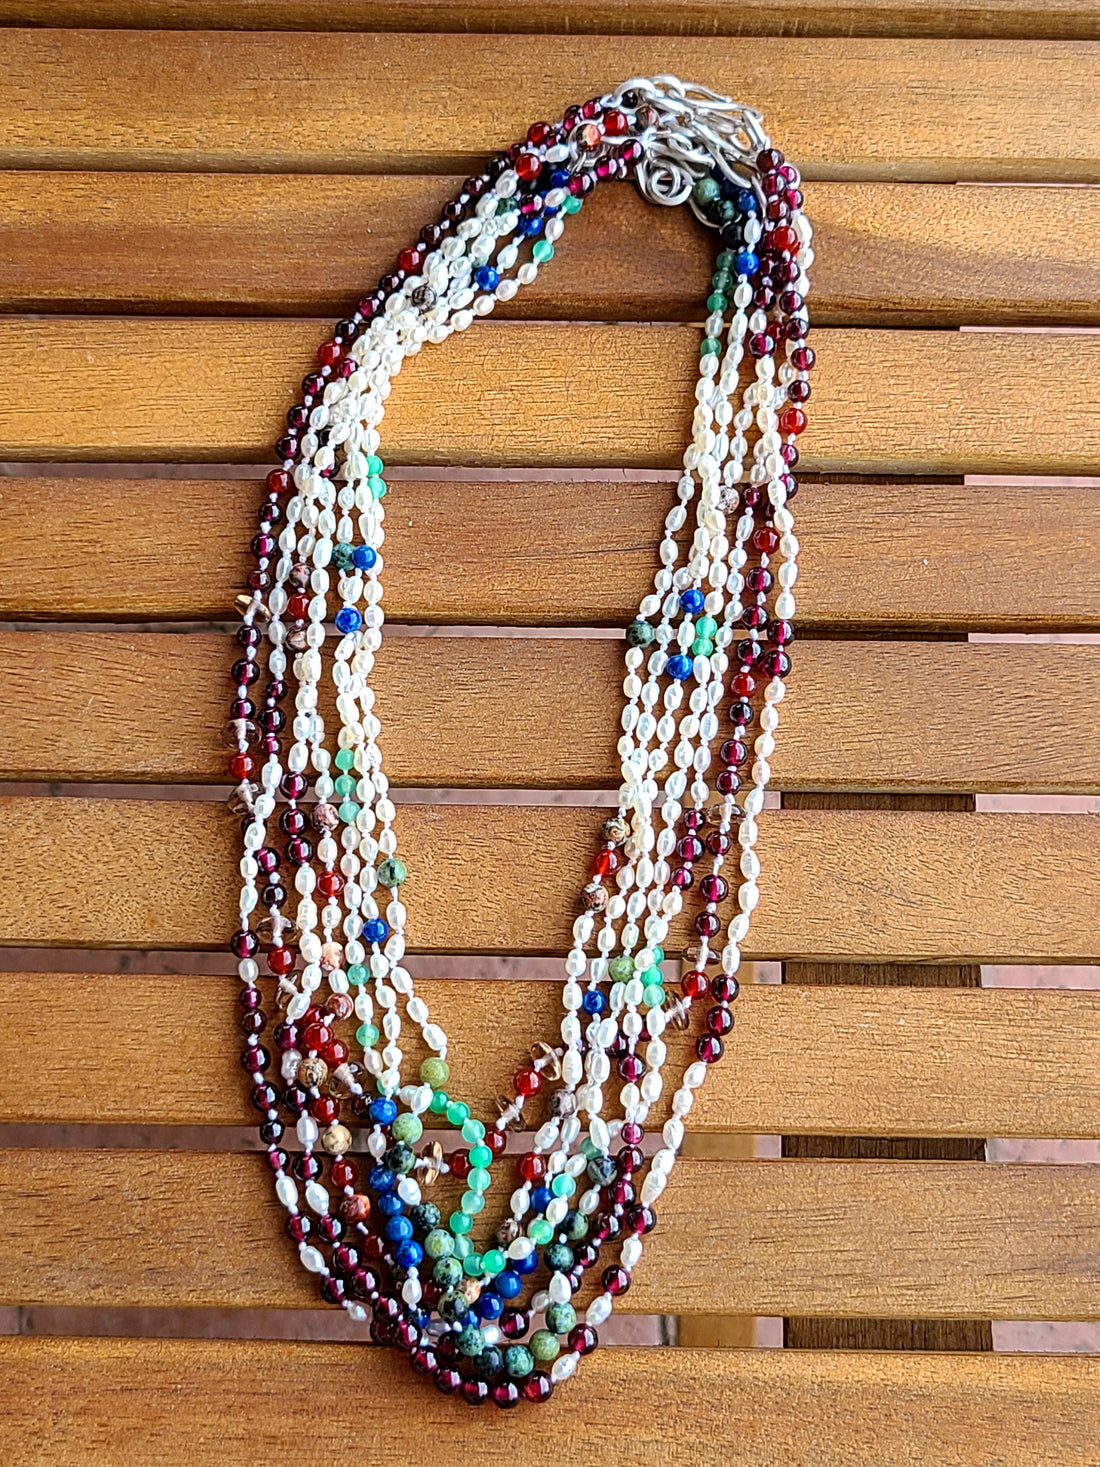 Pearls and gemstones: A Collection of Beaded necklaces